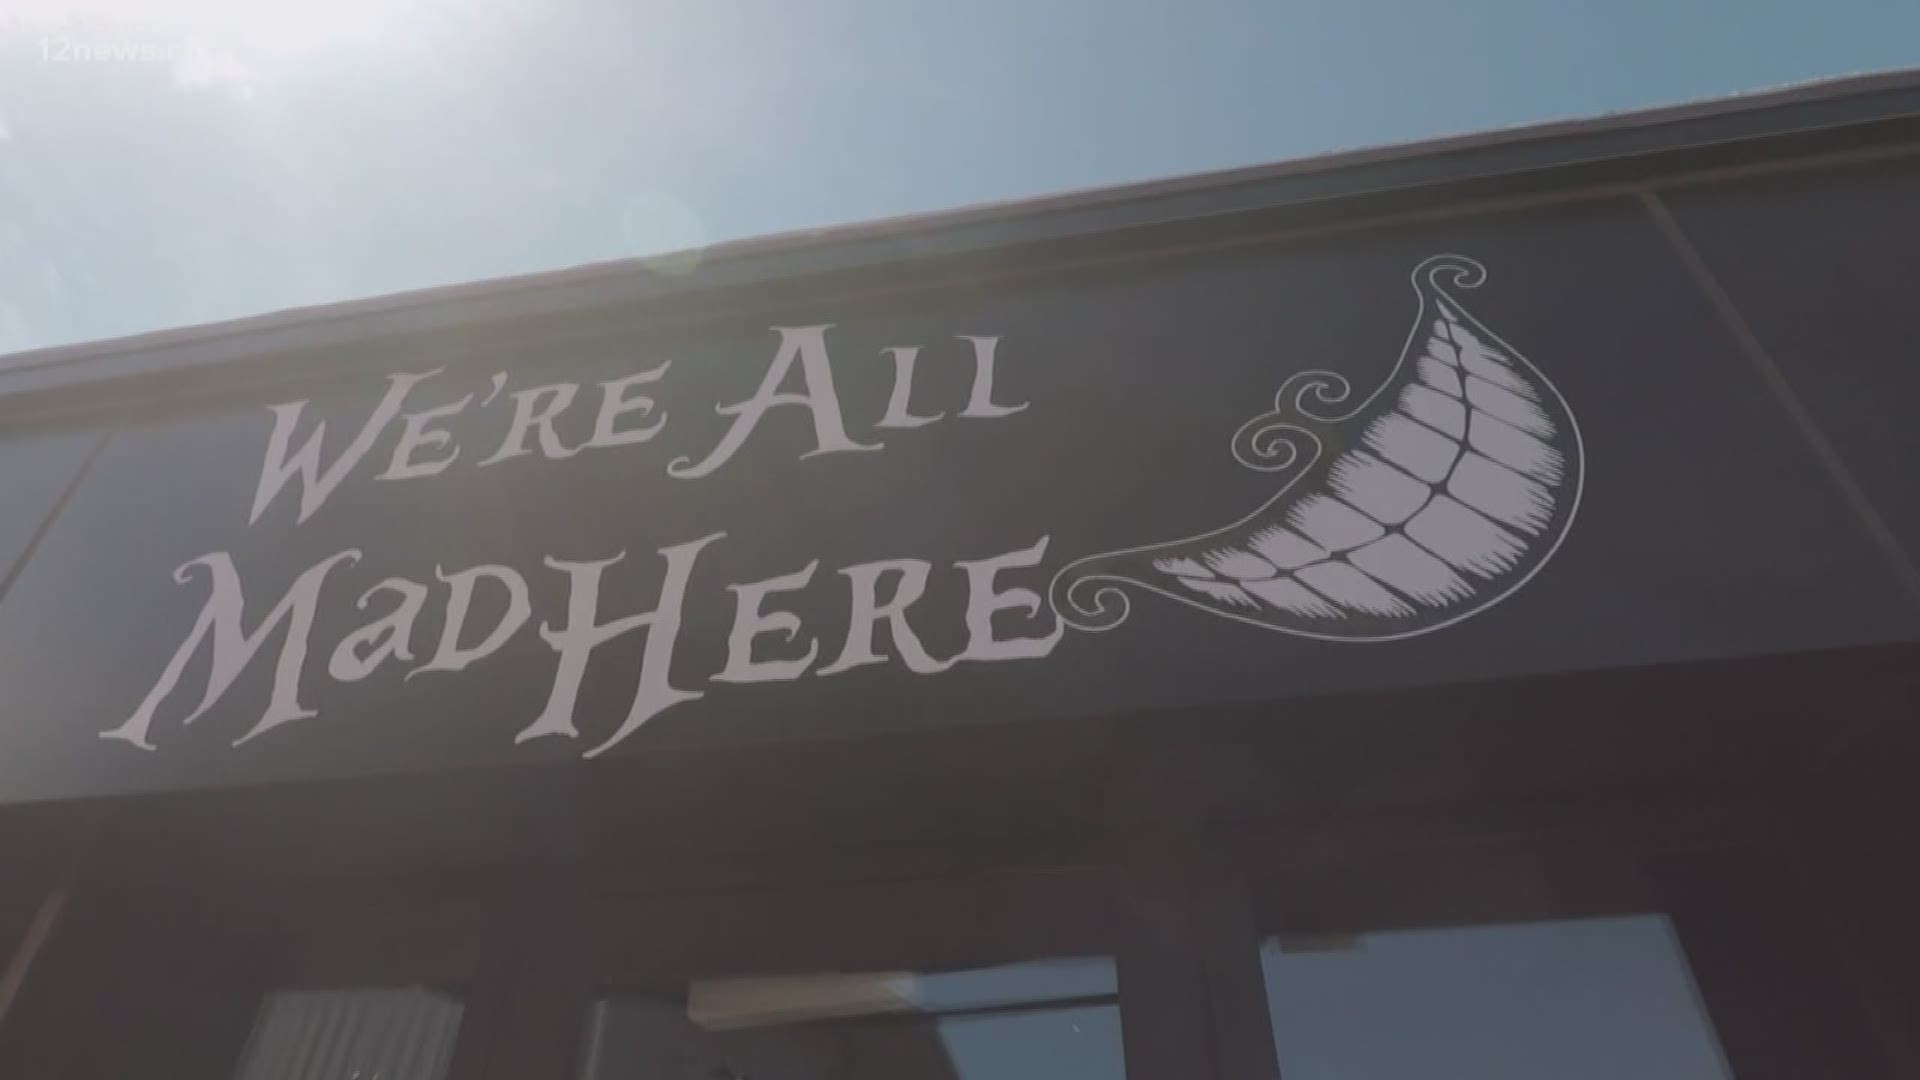 It's mad in there! An "Alice in Wonderland" themed restaurant and bar has opened up in downtown Phoenix to serve late night fare to adults who are children at heart.